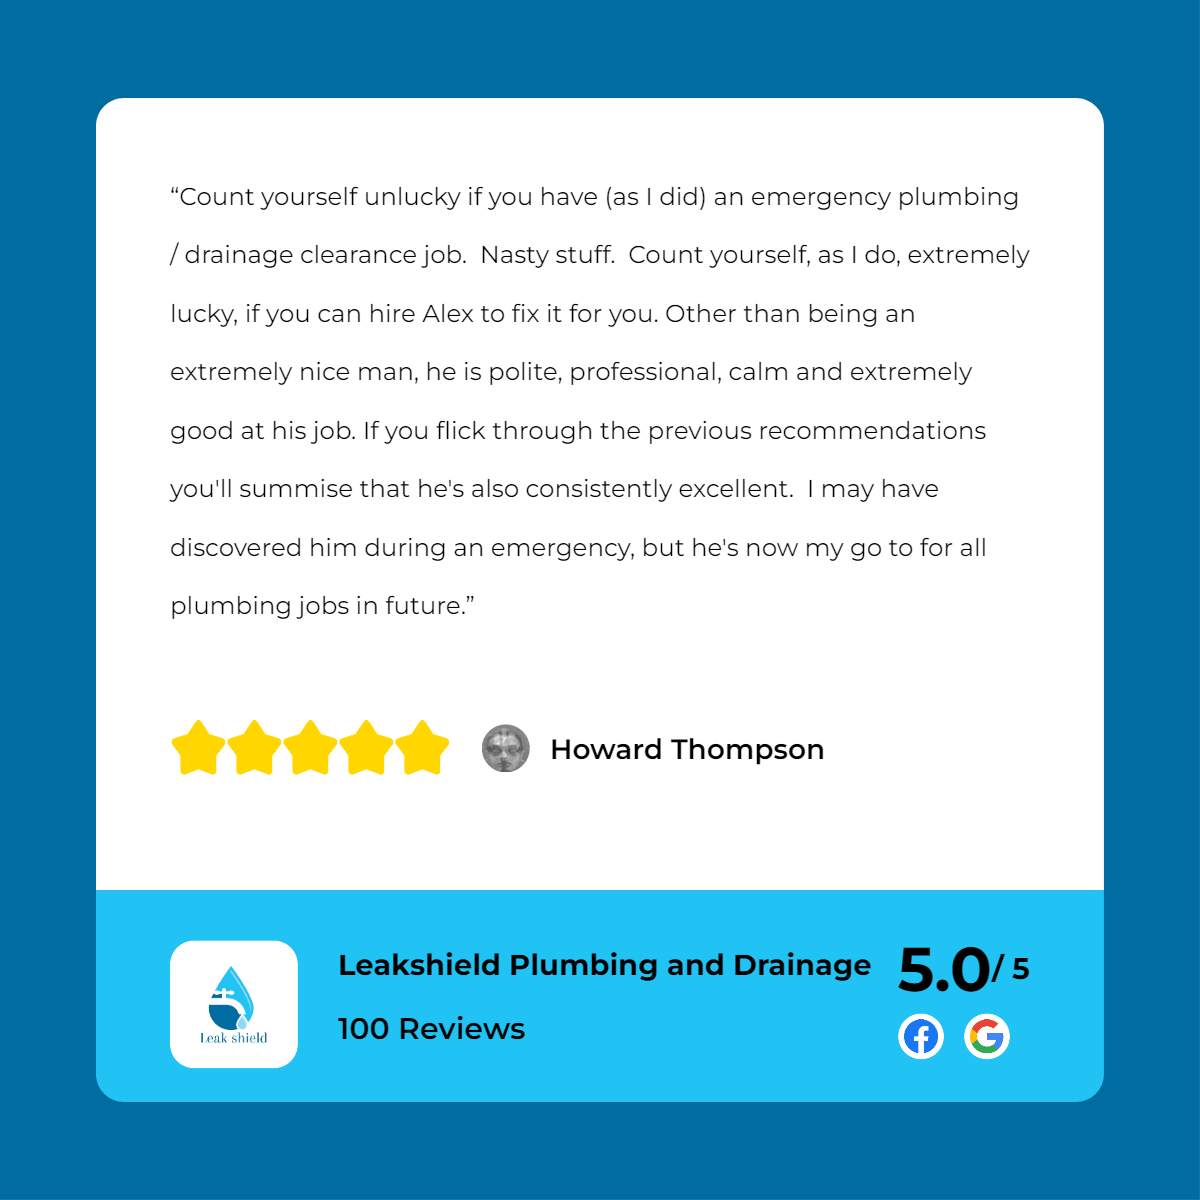 A customer review for a plumbing company.